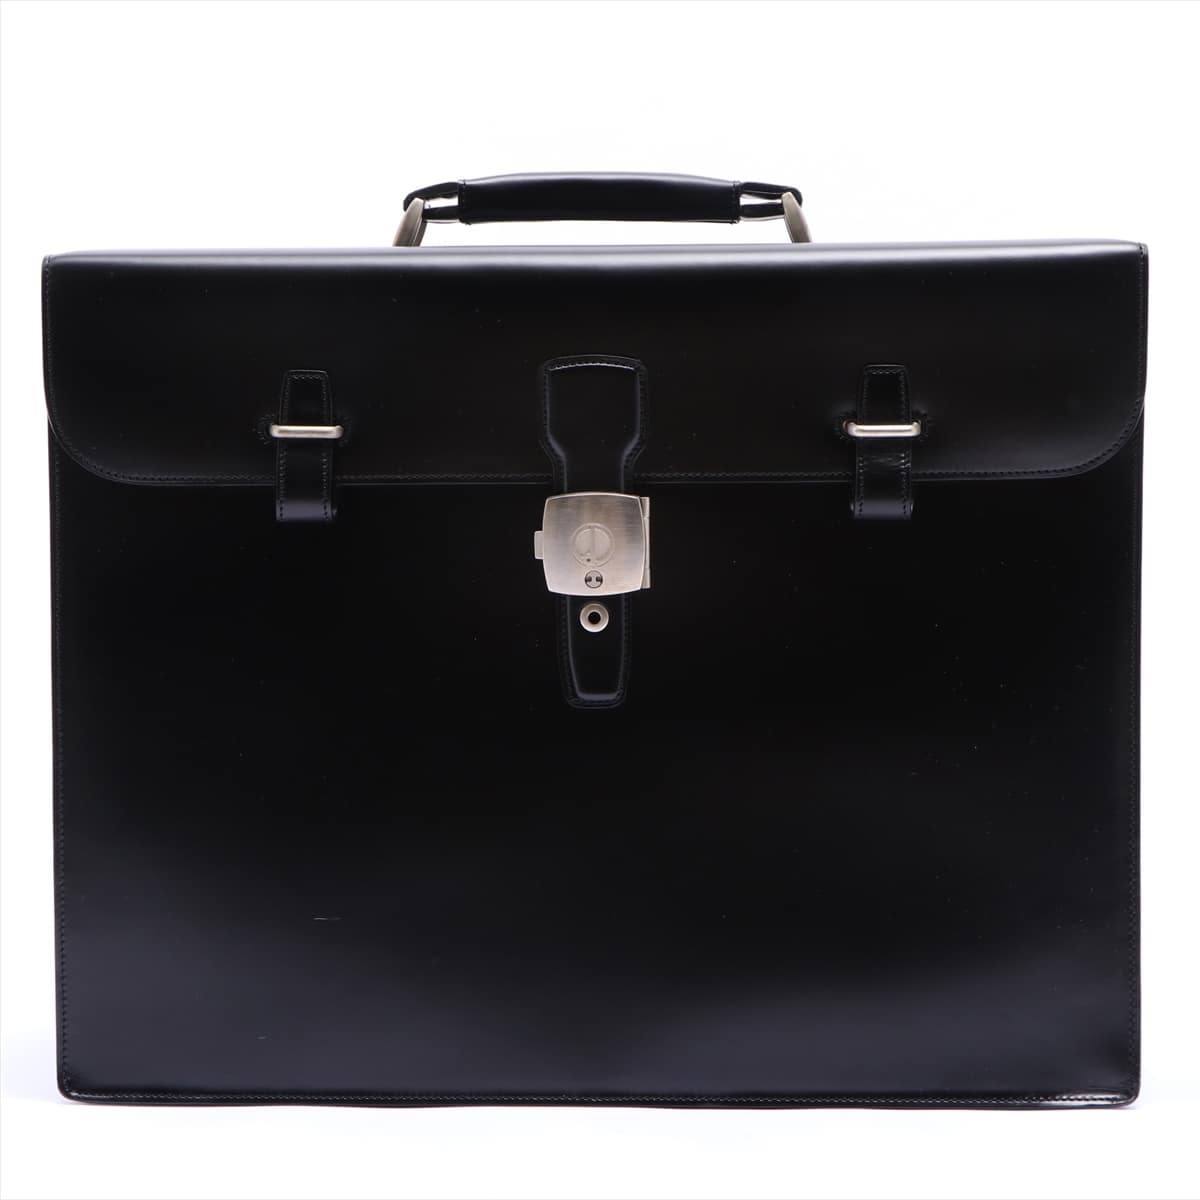 Alfred Dunhill Leather Attache case Black open papers